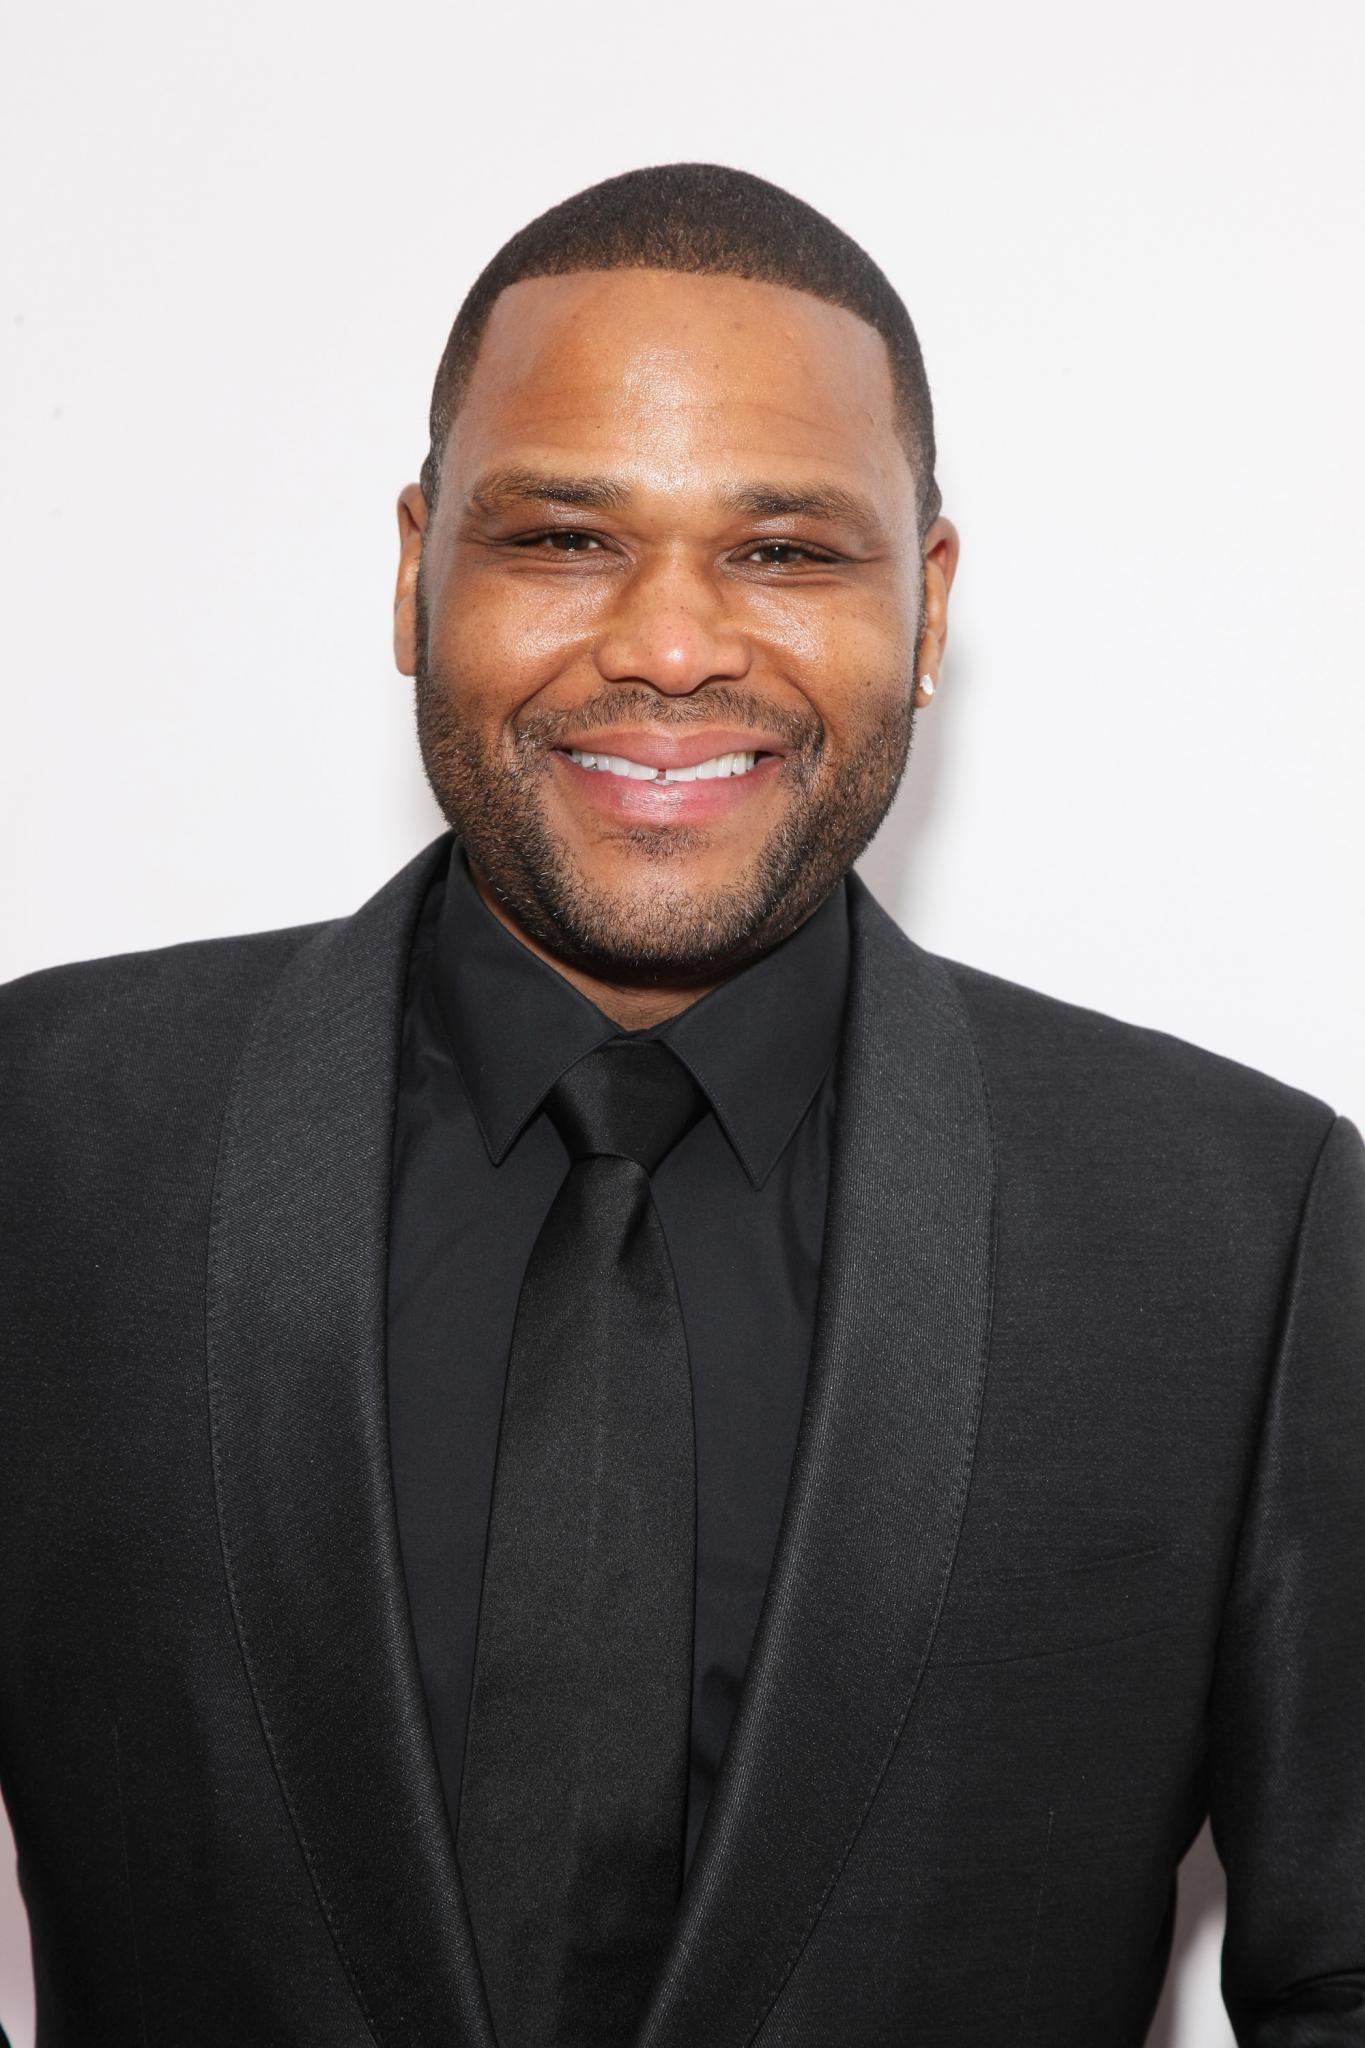 Awkward! Anthony Anderson Reveals His Mother Taught Him About Oral Sex
